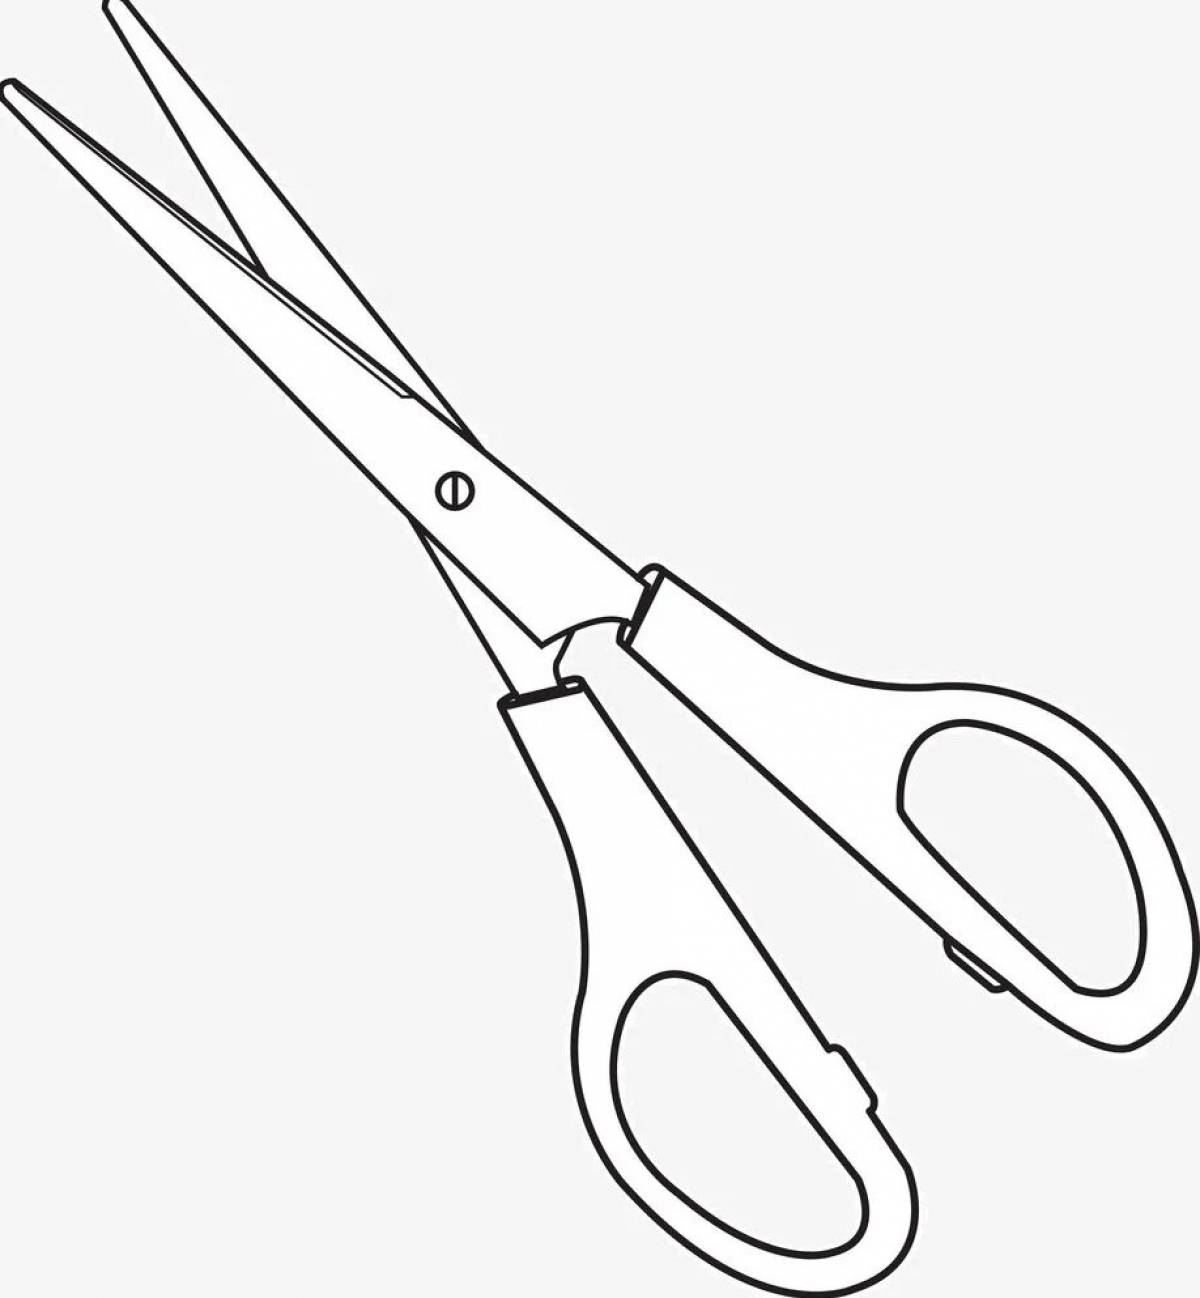 Outstanding scissors coloring book for kids